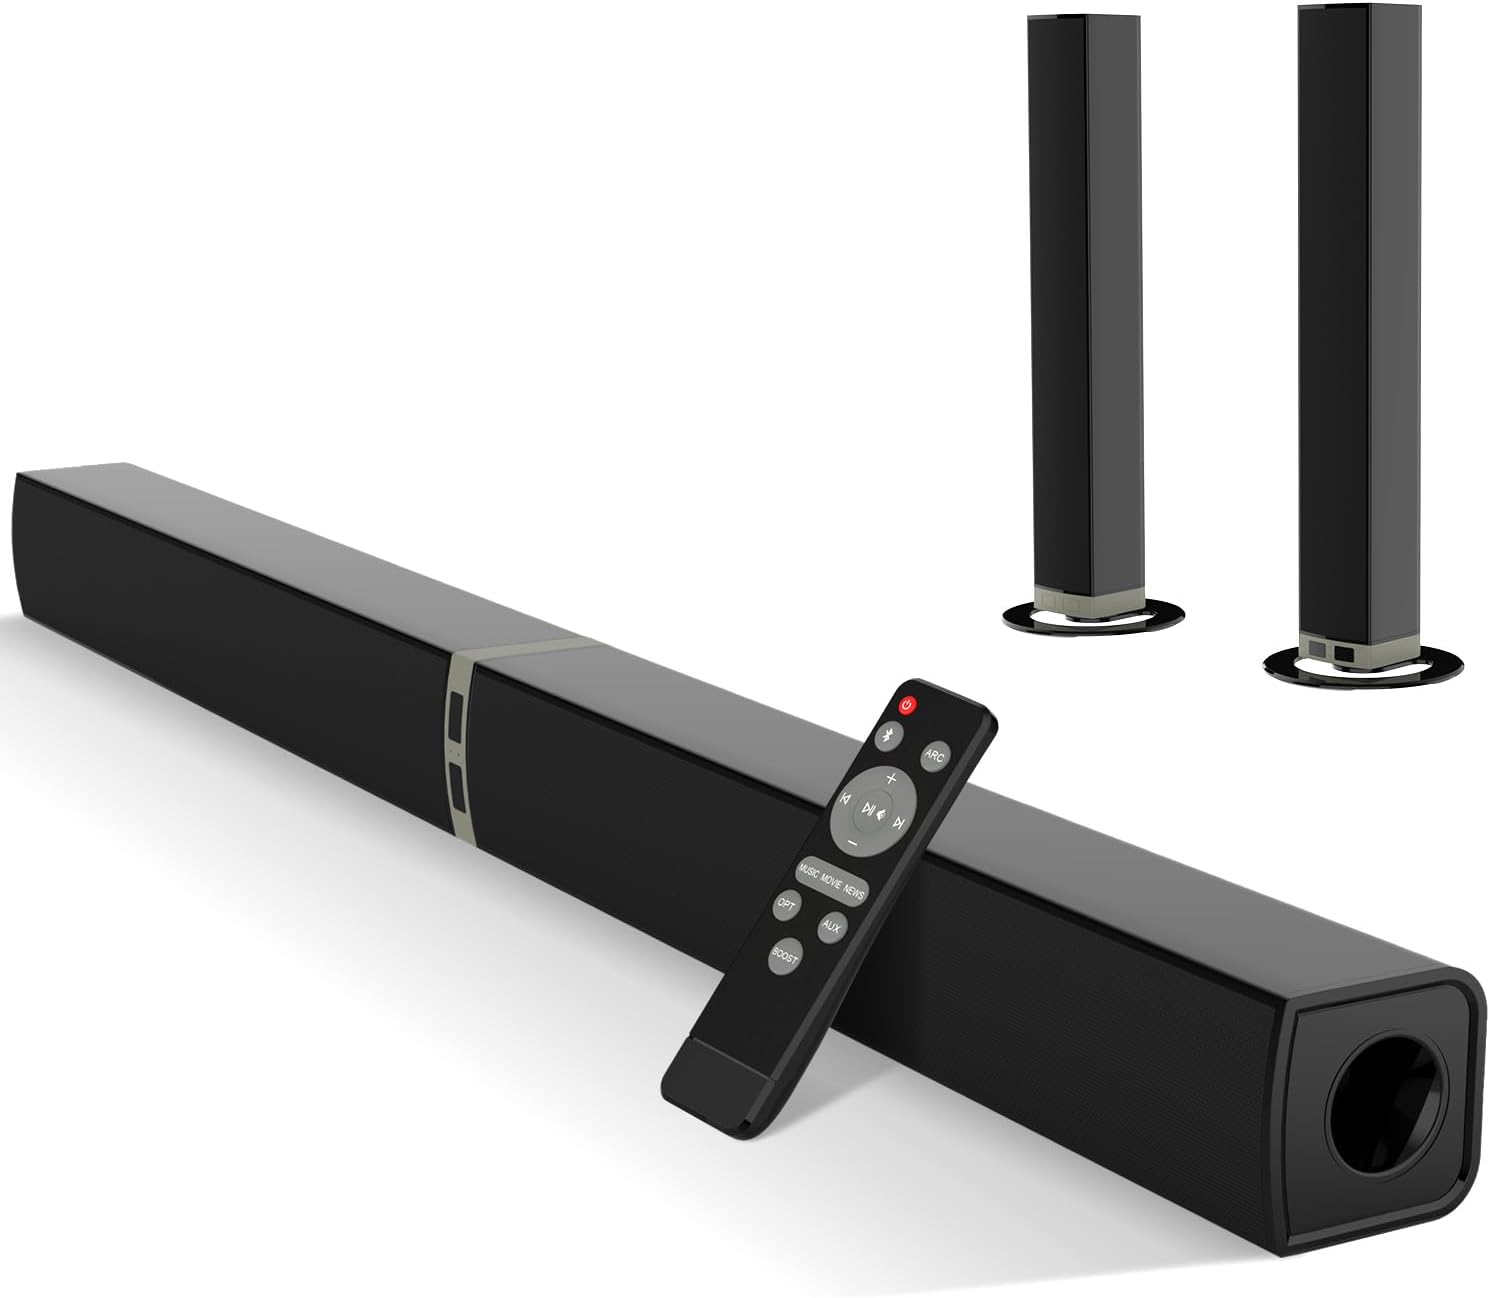 MZEIBO Sound Bars for TV Review